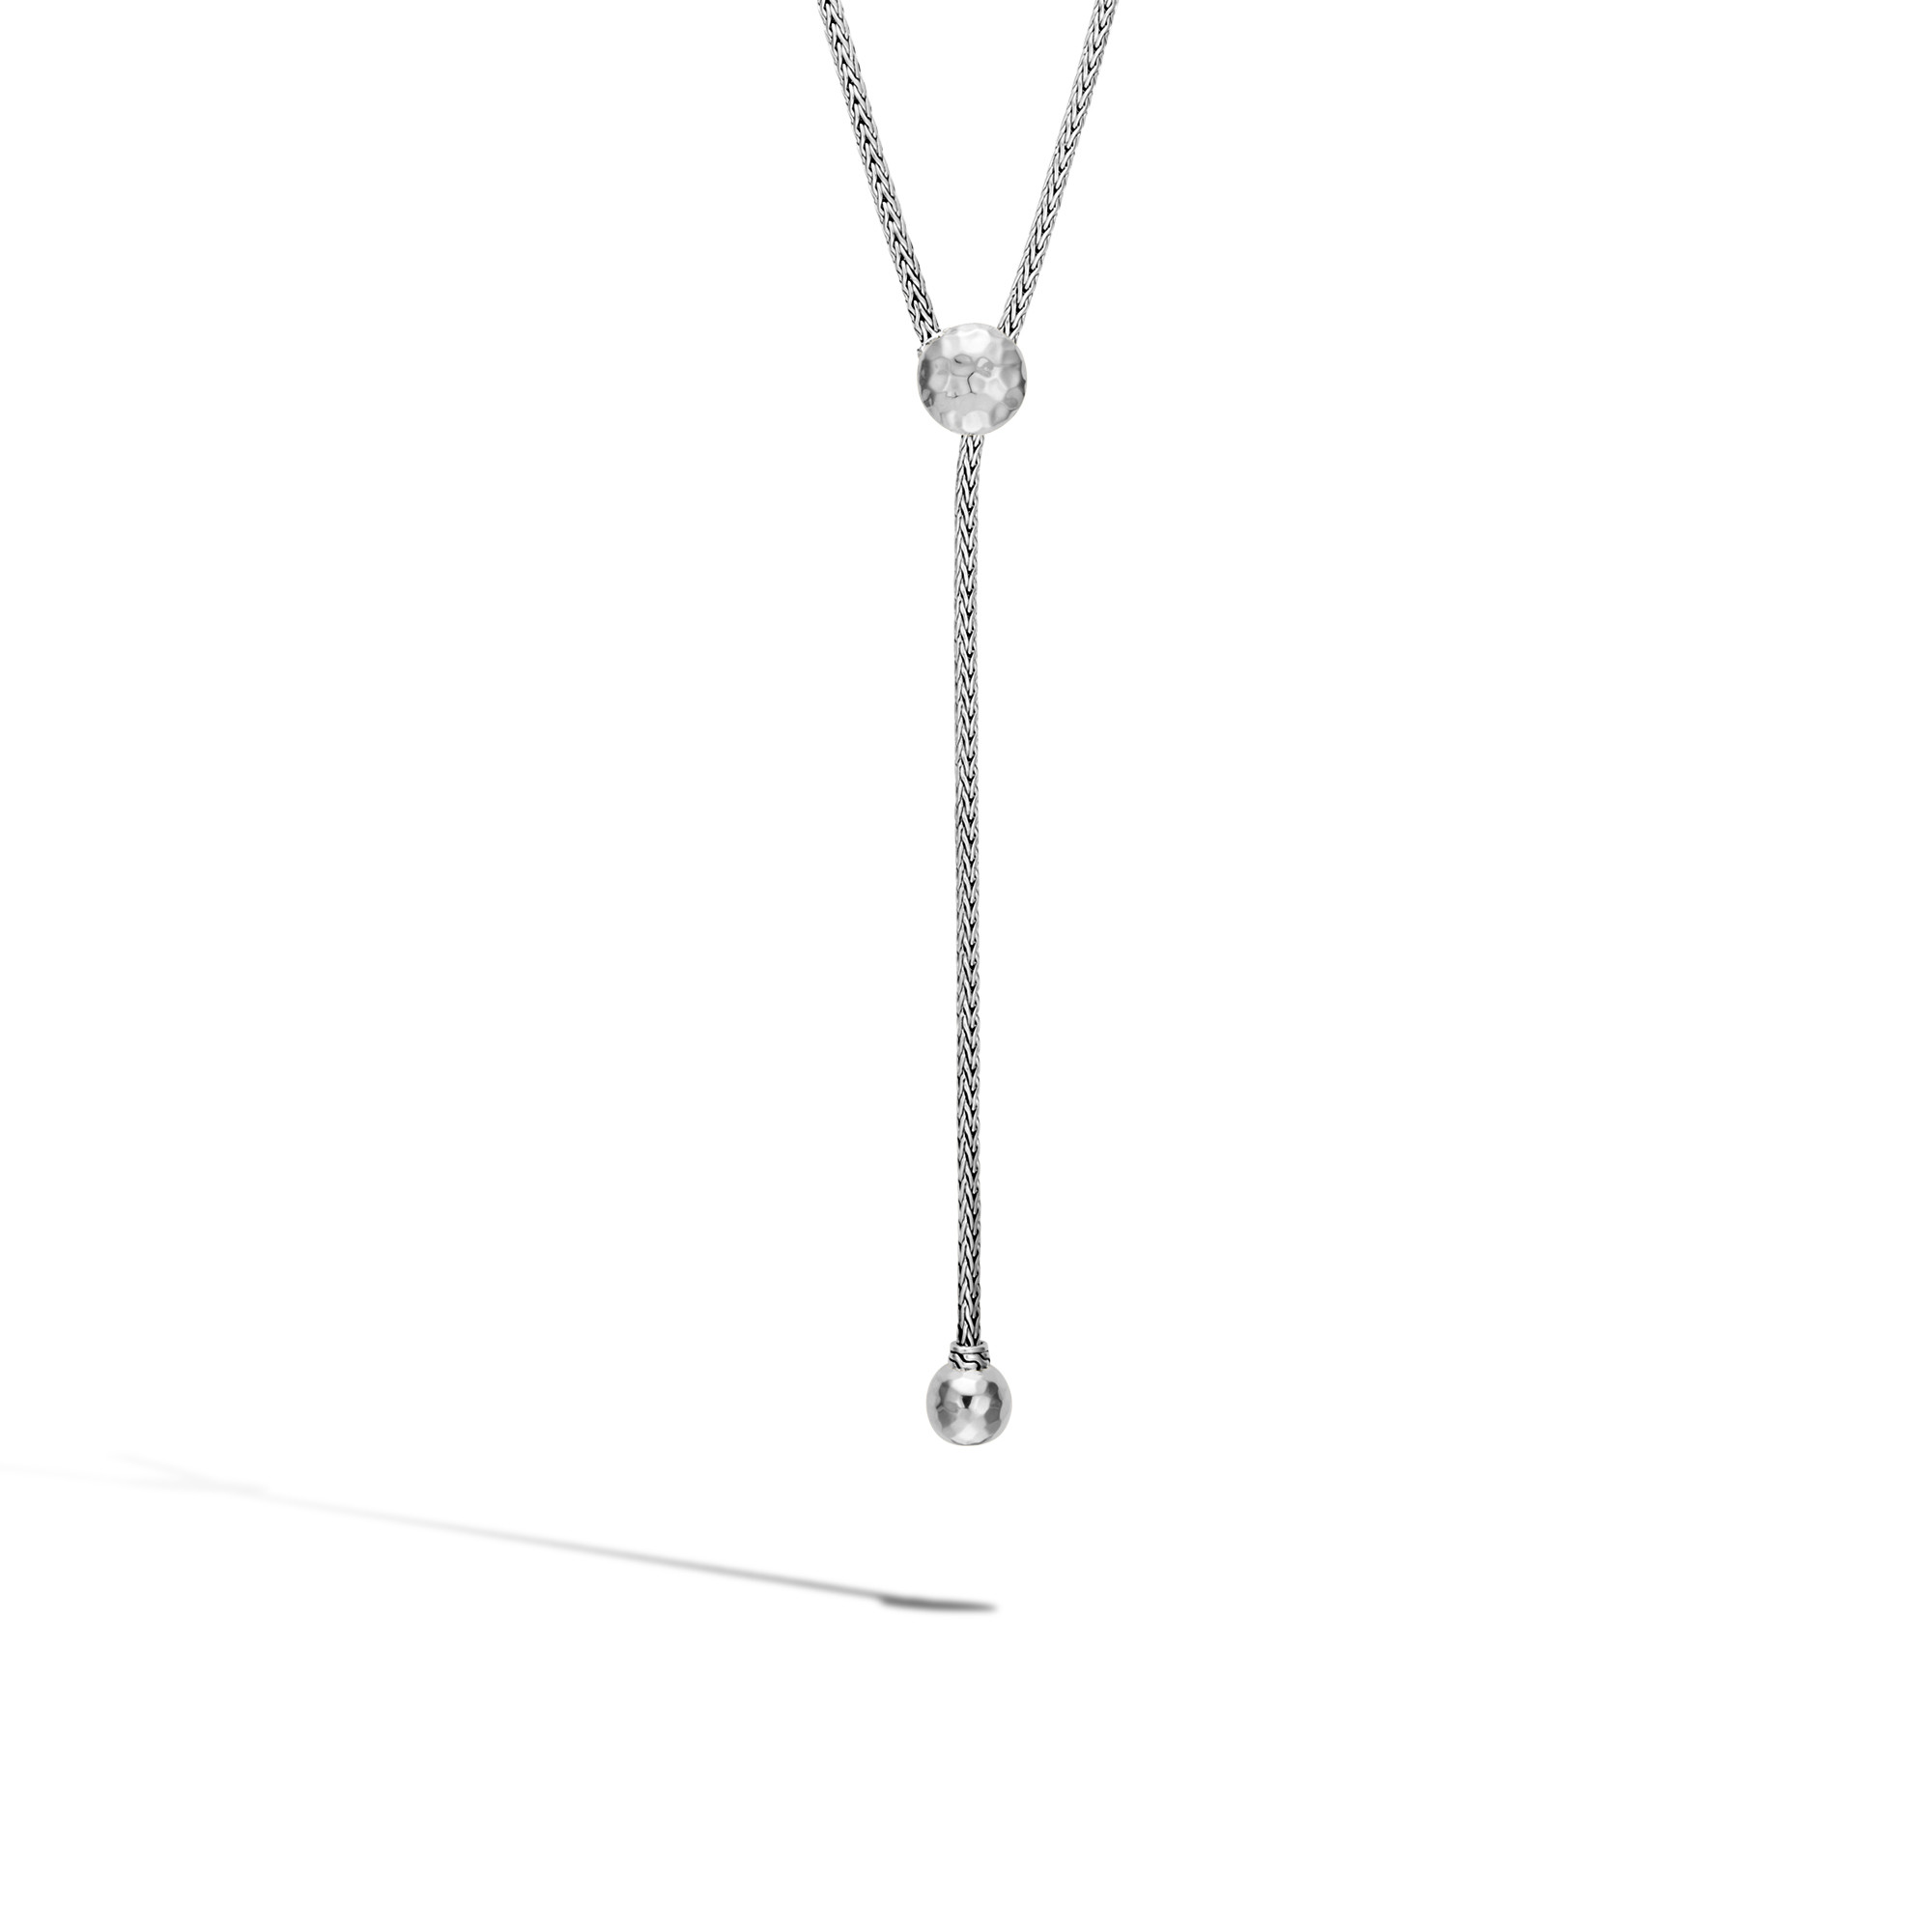 453768Classic-Chain-Hammered-Y-Necklace.jpg